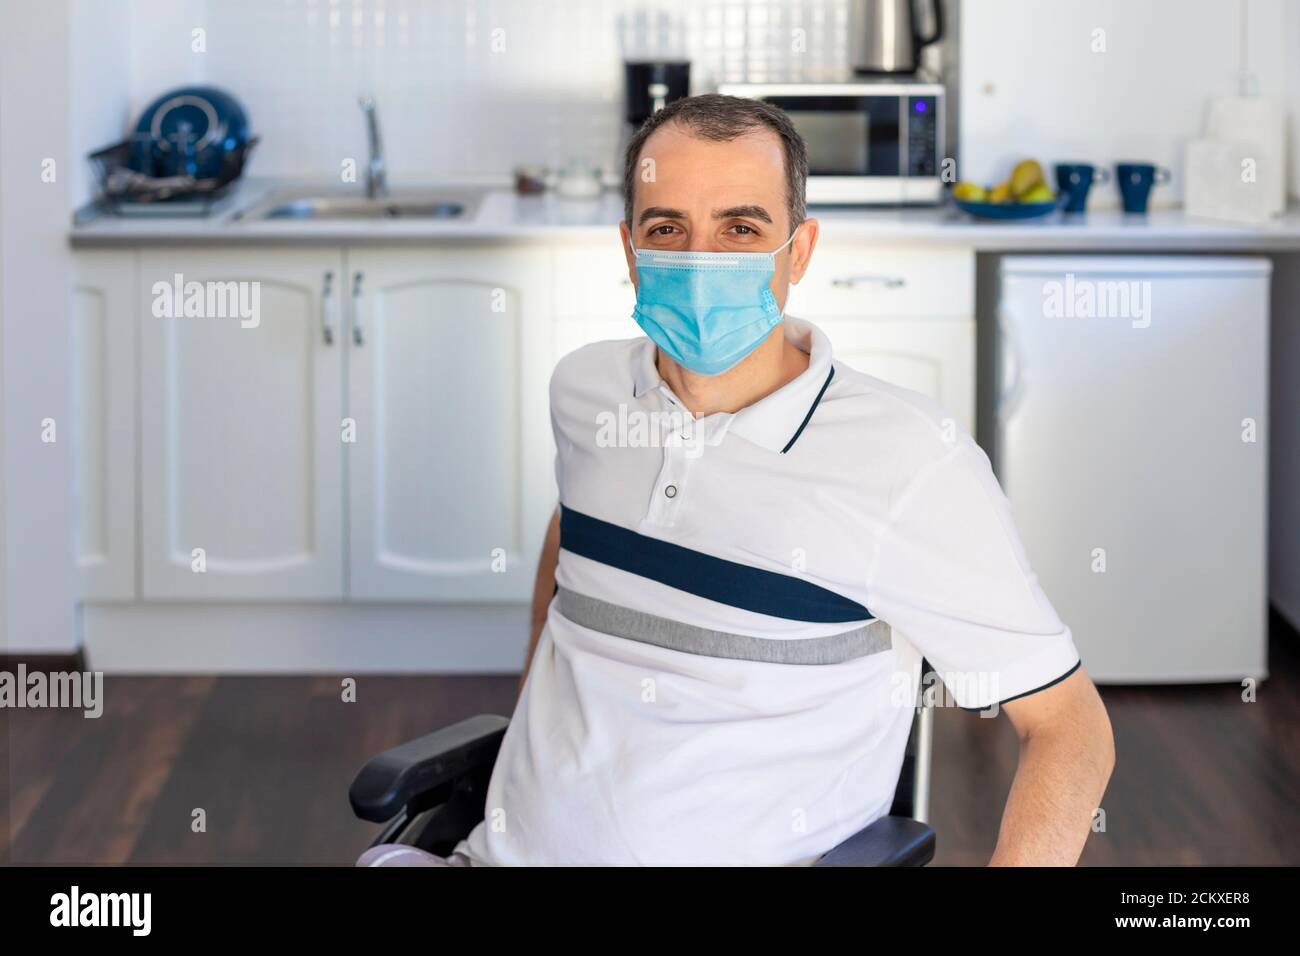 Smiling Young Handicapped Man Sitting On Wheelchair In Kitchen.  Young man wearing face mask sitting infront of kitchen. Focus on his face. Stock Photo